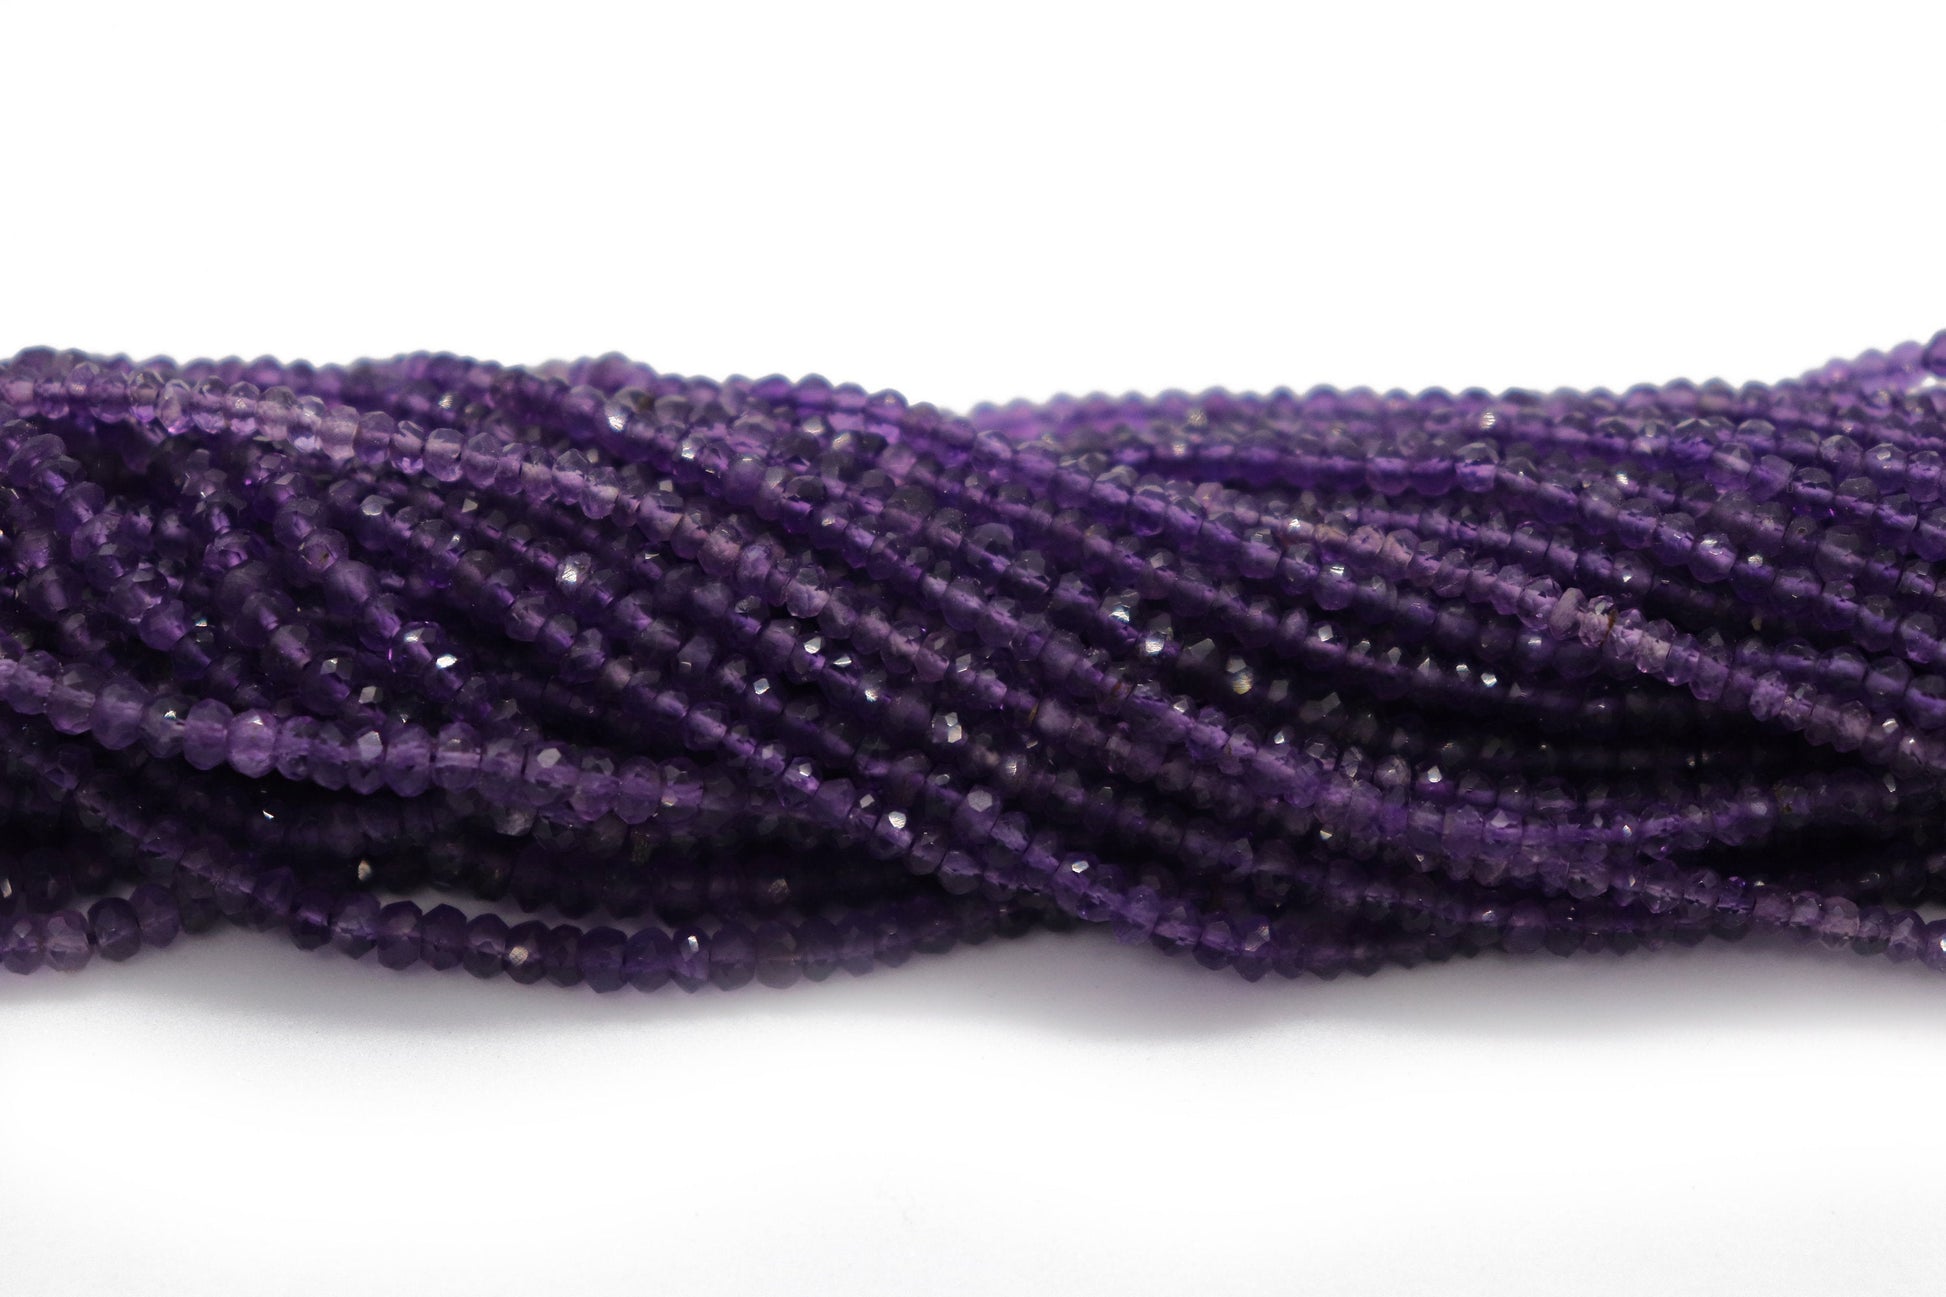 Amethyst Rondelle Beads, faceted beads, AAA+ Quality, 3-4mm Size, Jewelry supplies, crafting supplies & beading supplies, 15 inch Gemstone beads Beadsforyourjewelry